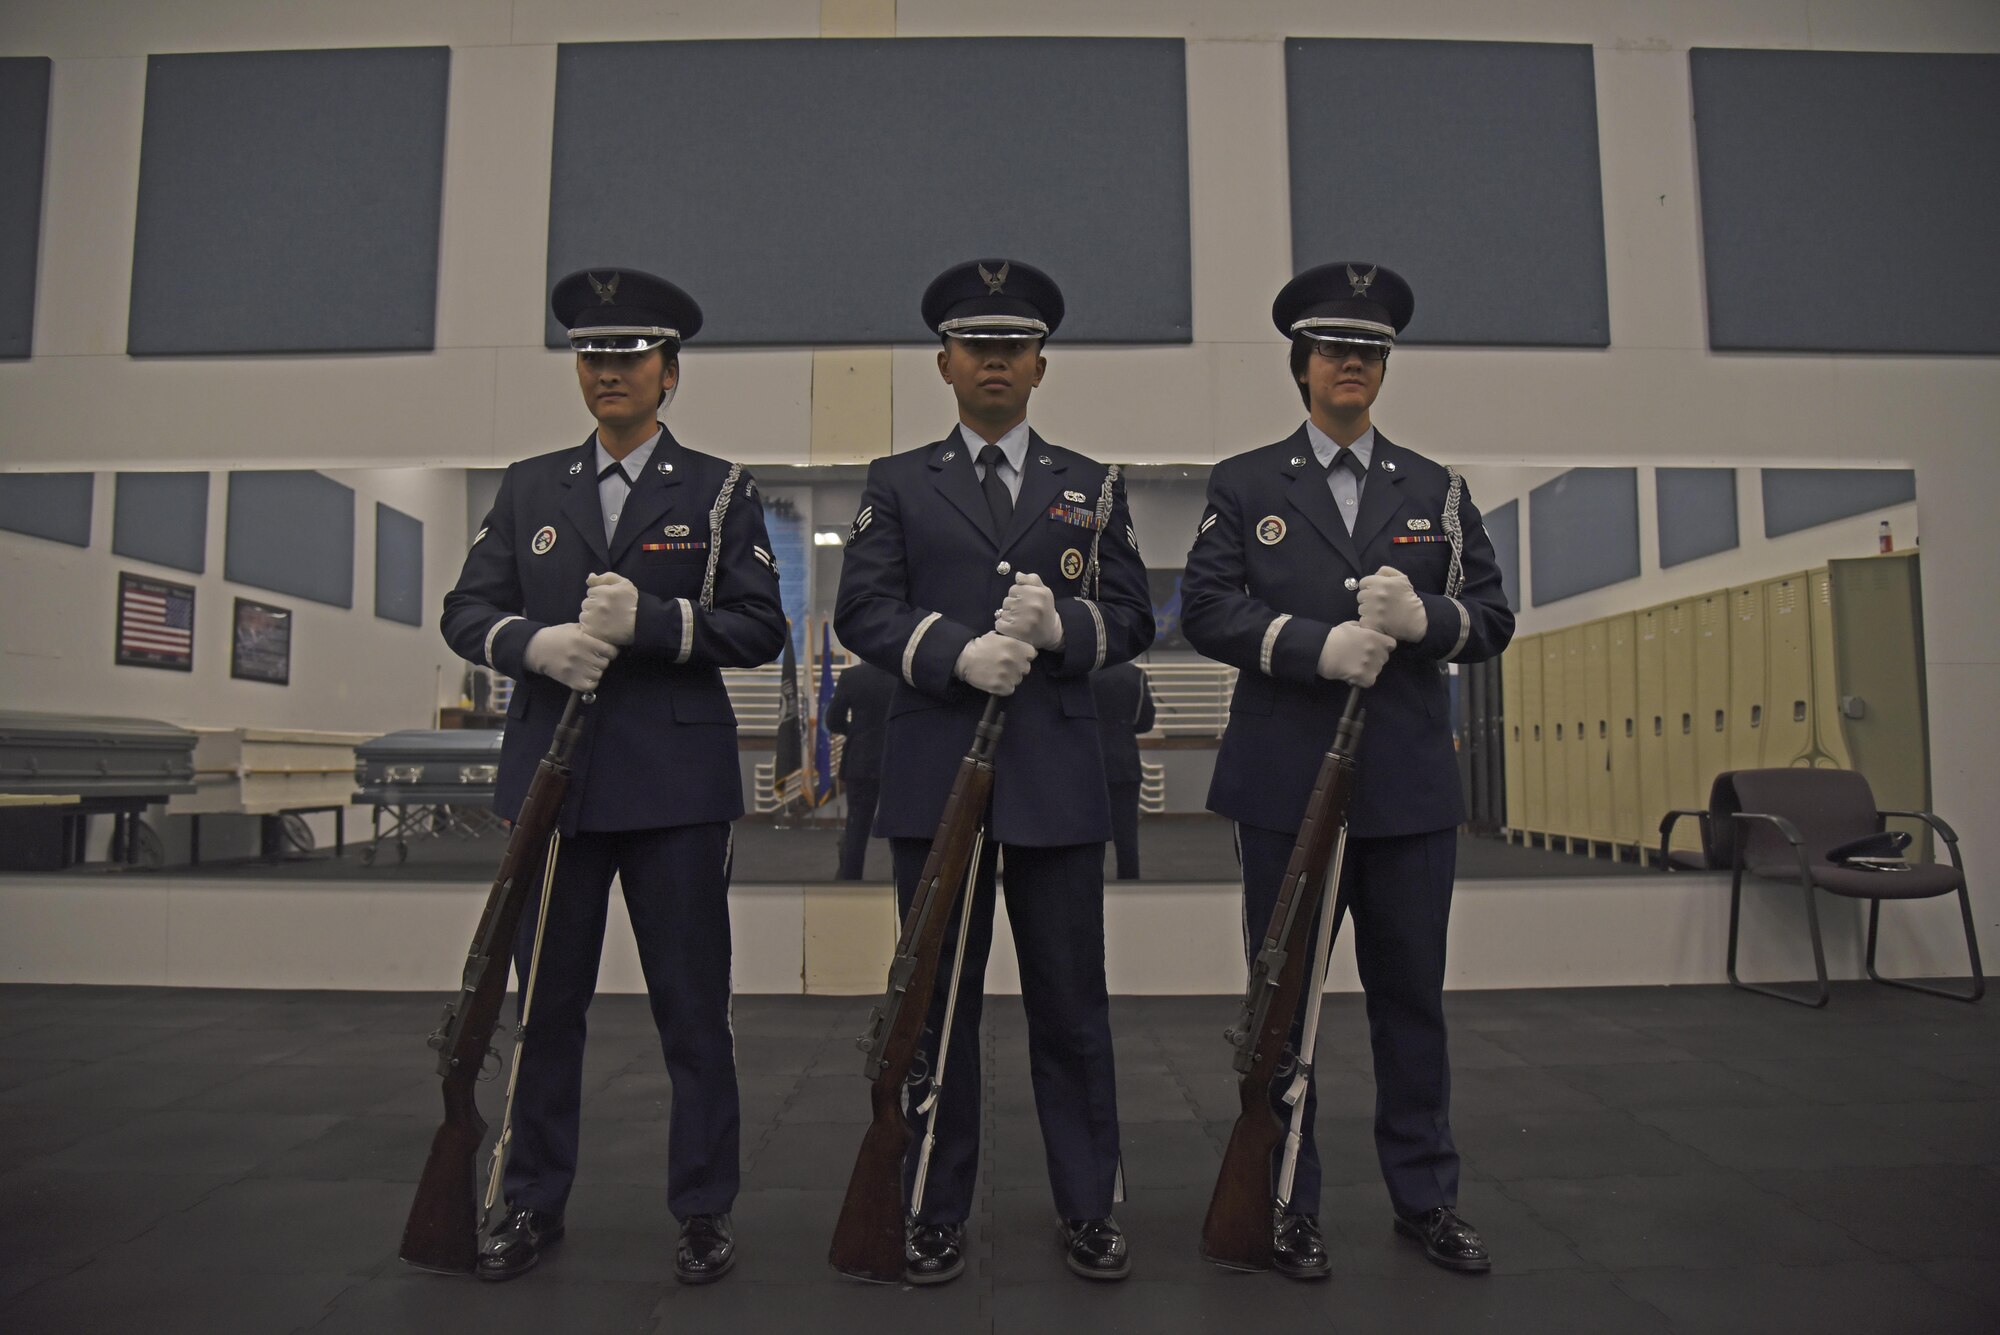 The Fairchild Honor Guard conducts rifle party training Nov. 16, 2017, at Fairchild Air Force Base, Washington. Each new rotation begins with an intense 12-day training regimen. These two weeks focus on various color guard, funeral and rifle sequences and movements, starting with the basics and slowly introducing variations. (U.S. Air Force photo/Senior Airman Mackenzie Richardson)